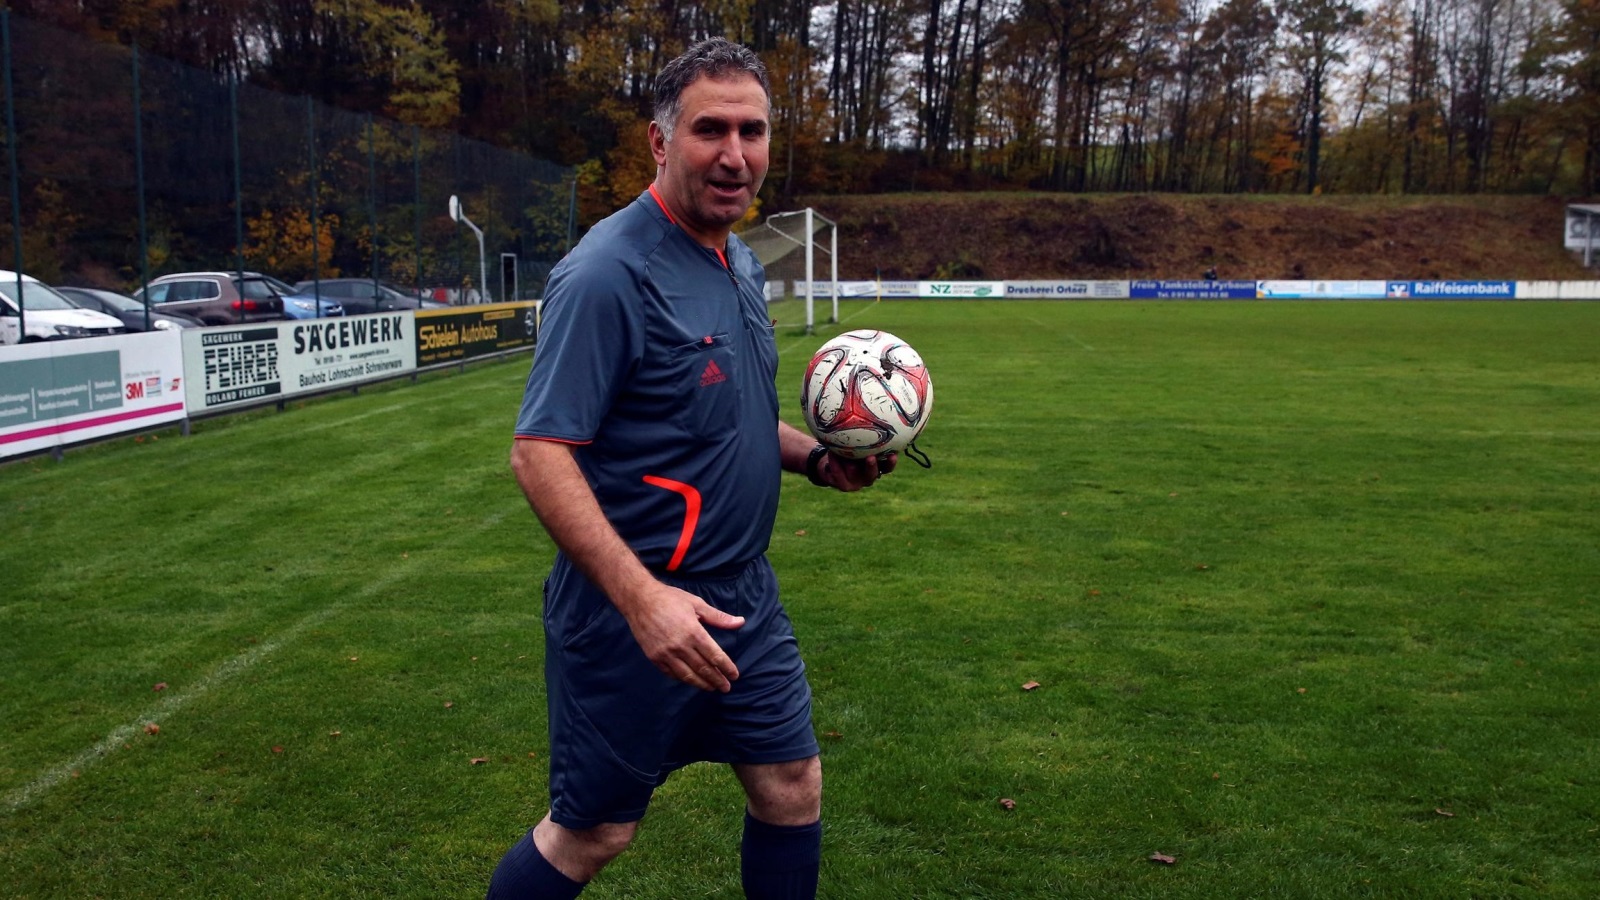 Former FIFA referee Hamdi Al Kadri conducts a German 9th division soccer match between TSV Pyrbaum and FC Altdorf in Pyrbaum, southern Germany, November 6, 2016. Picture taken November 6, 2016. Syrian migrant Al-Kadri was member of the referee team at high level FIFA matches, such as World Cup bouts before he came to Germany as a Syrian refugee. REUTERS/Michael Dalder